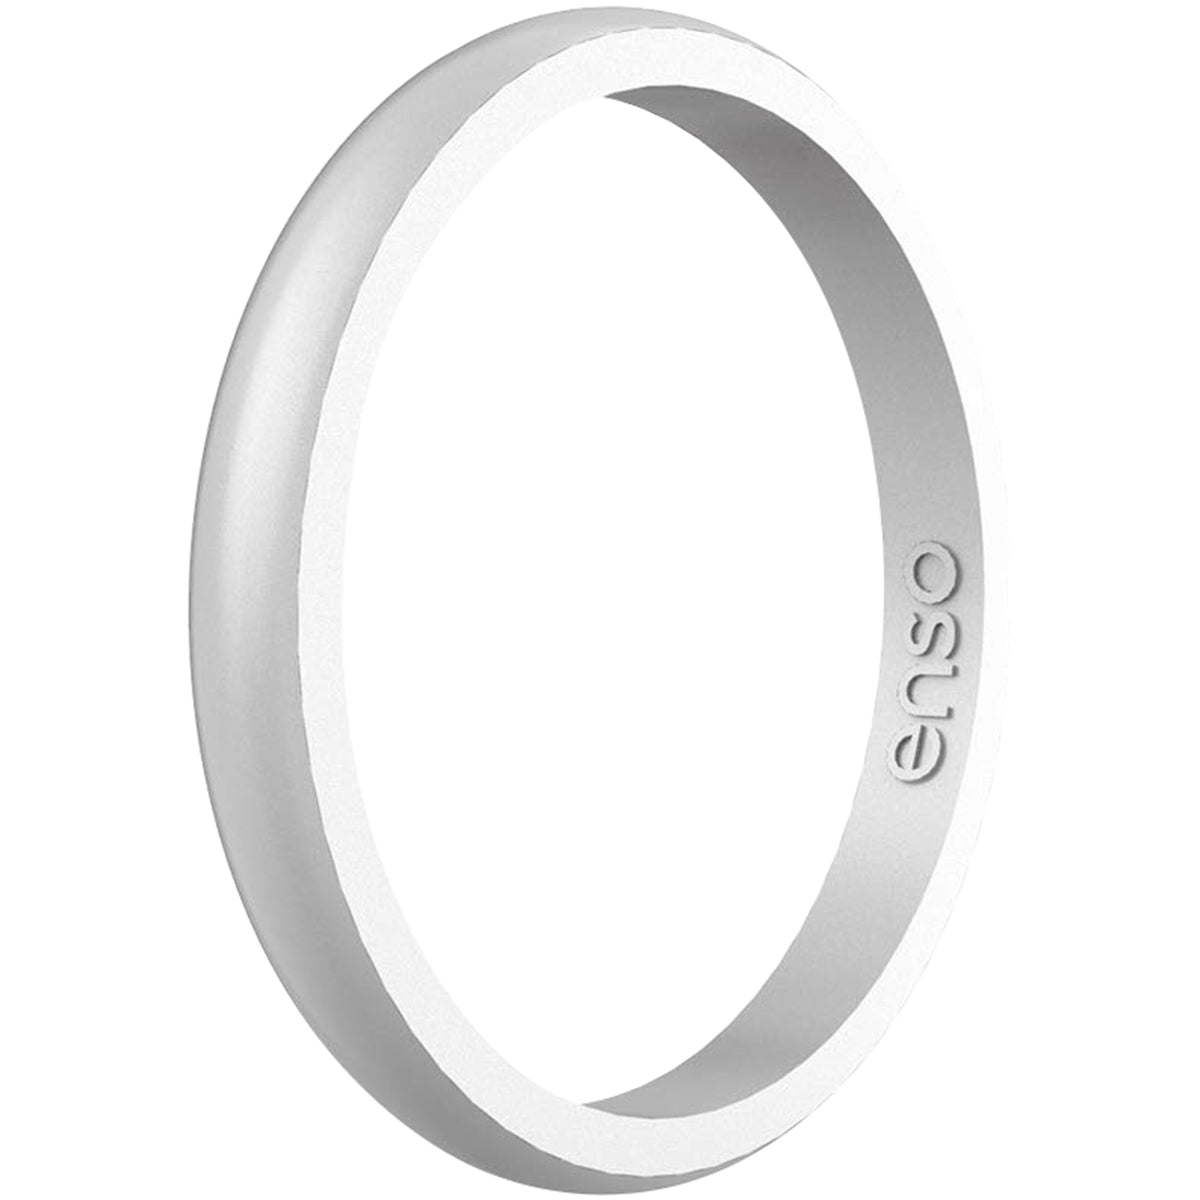 Enso Rings Halo Elements Series Silicone Ring - Silver Enso Rings